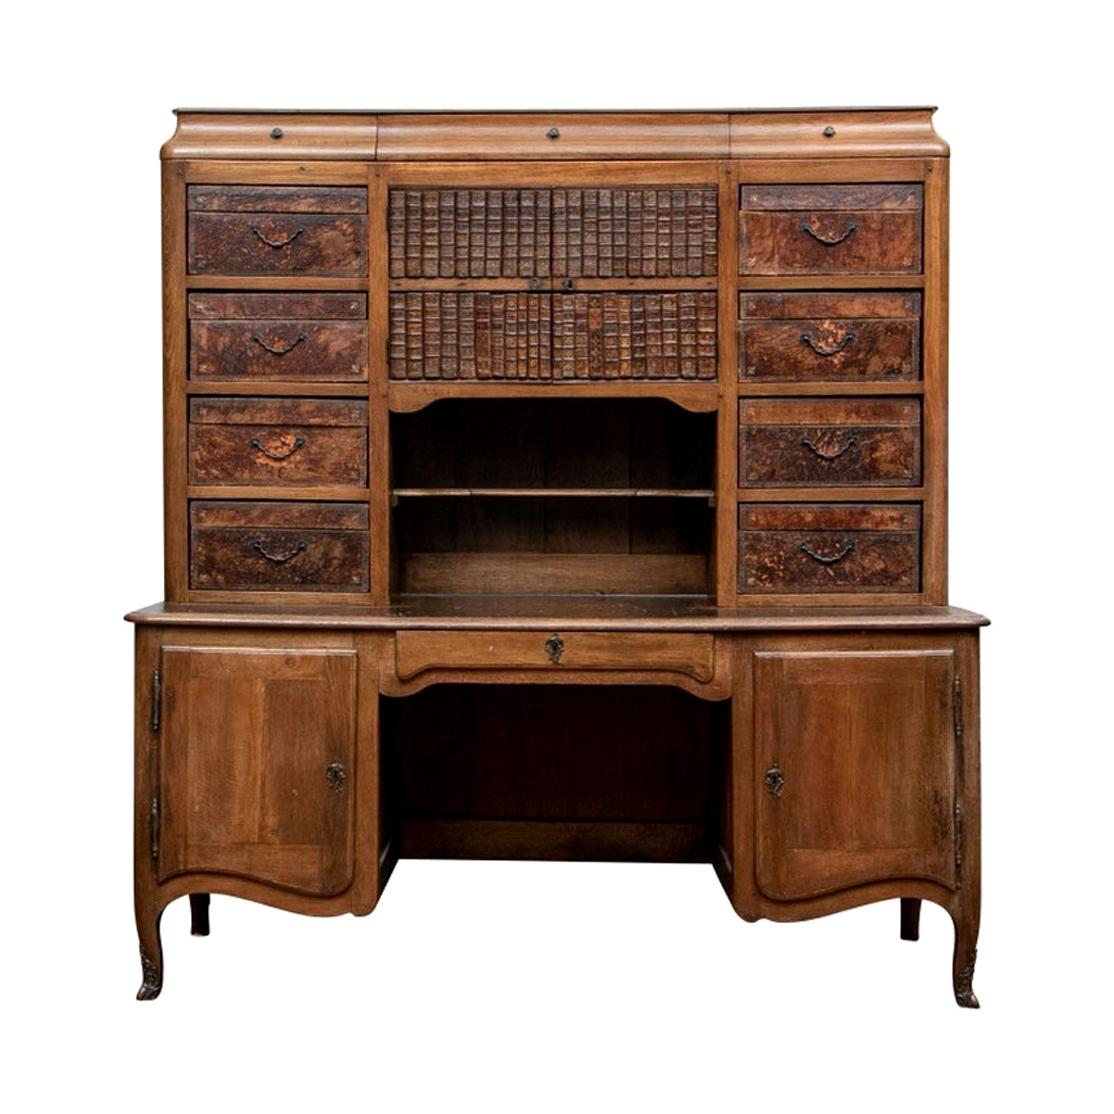 Notable French Secretaire Cabinet With Leather Bound Doors And Drawers